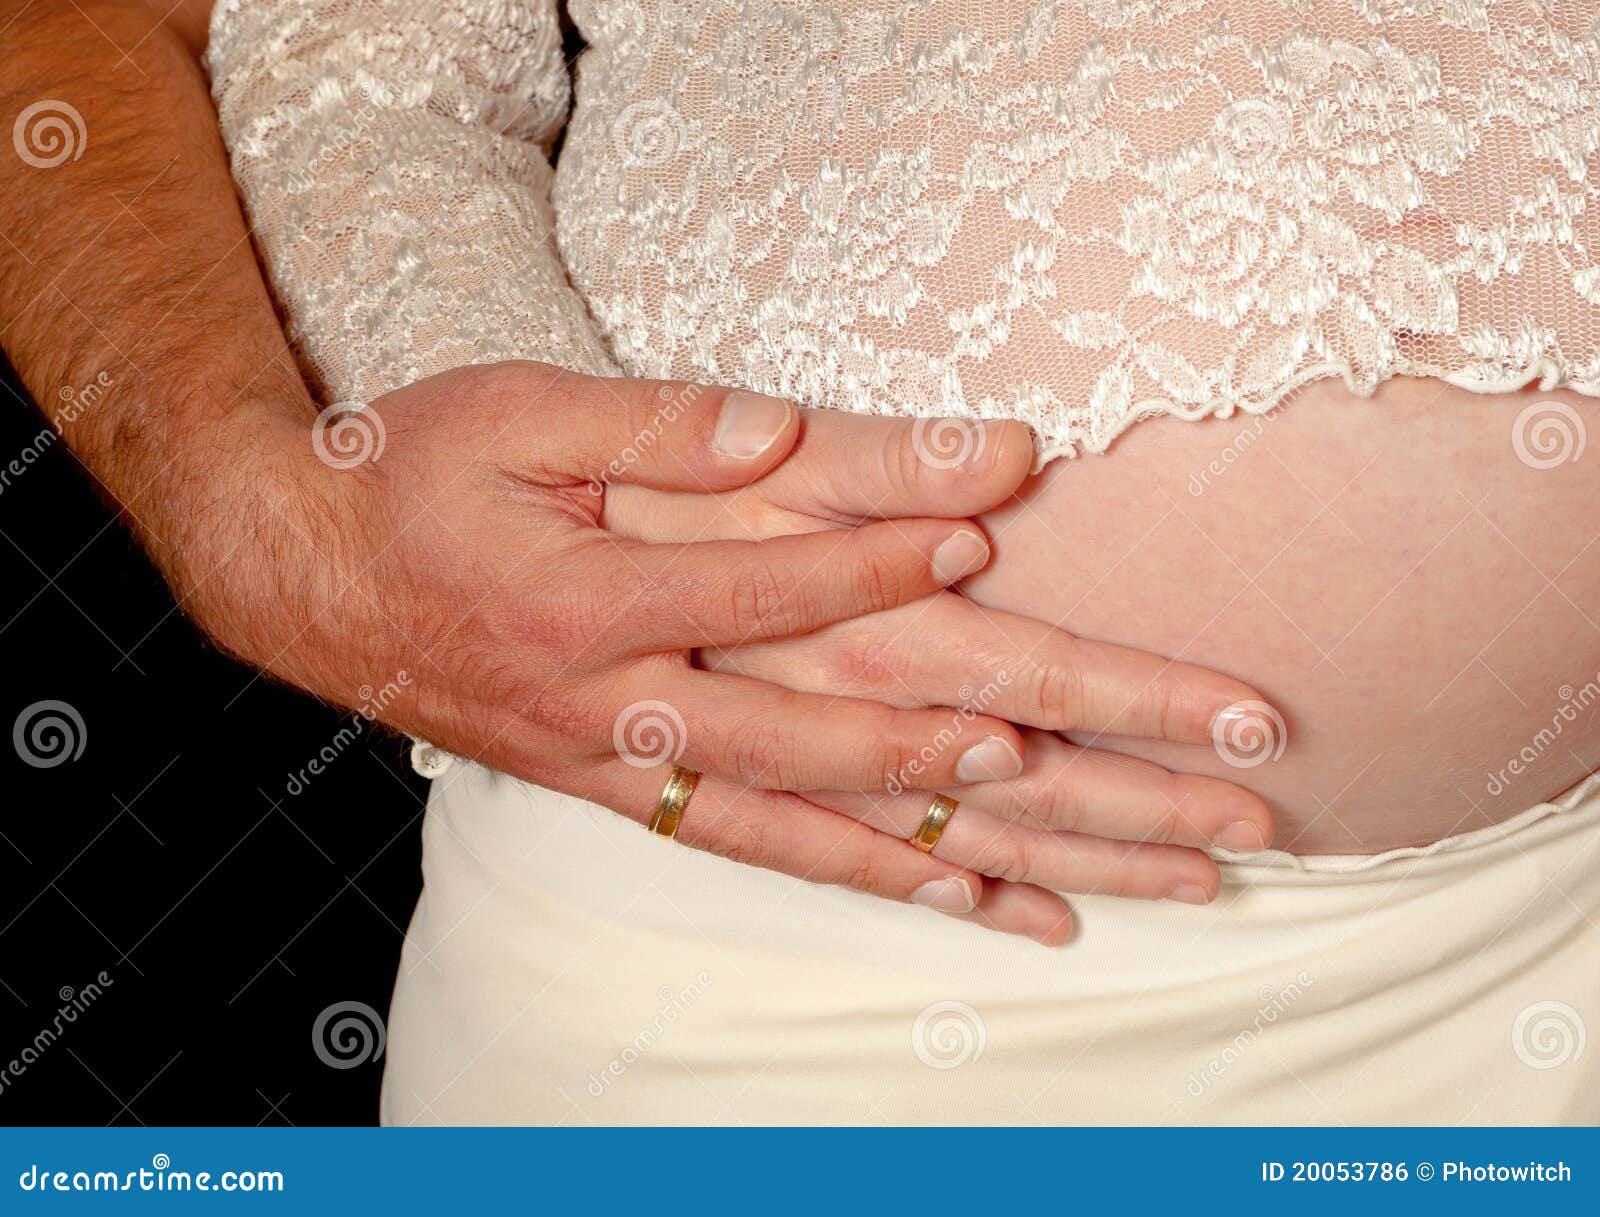 Wedding ring over belly